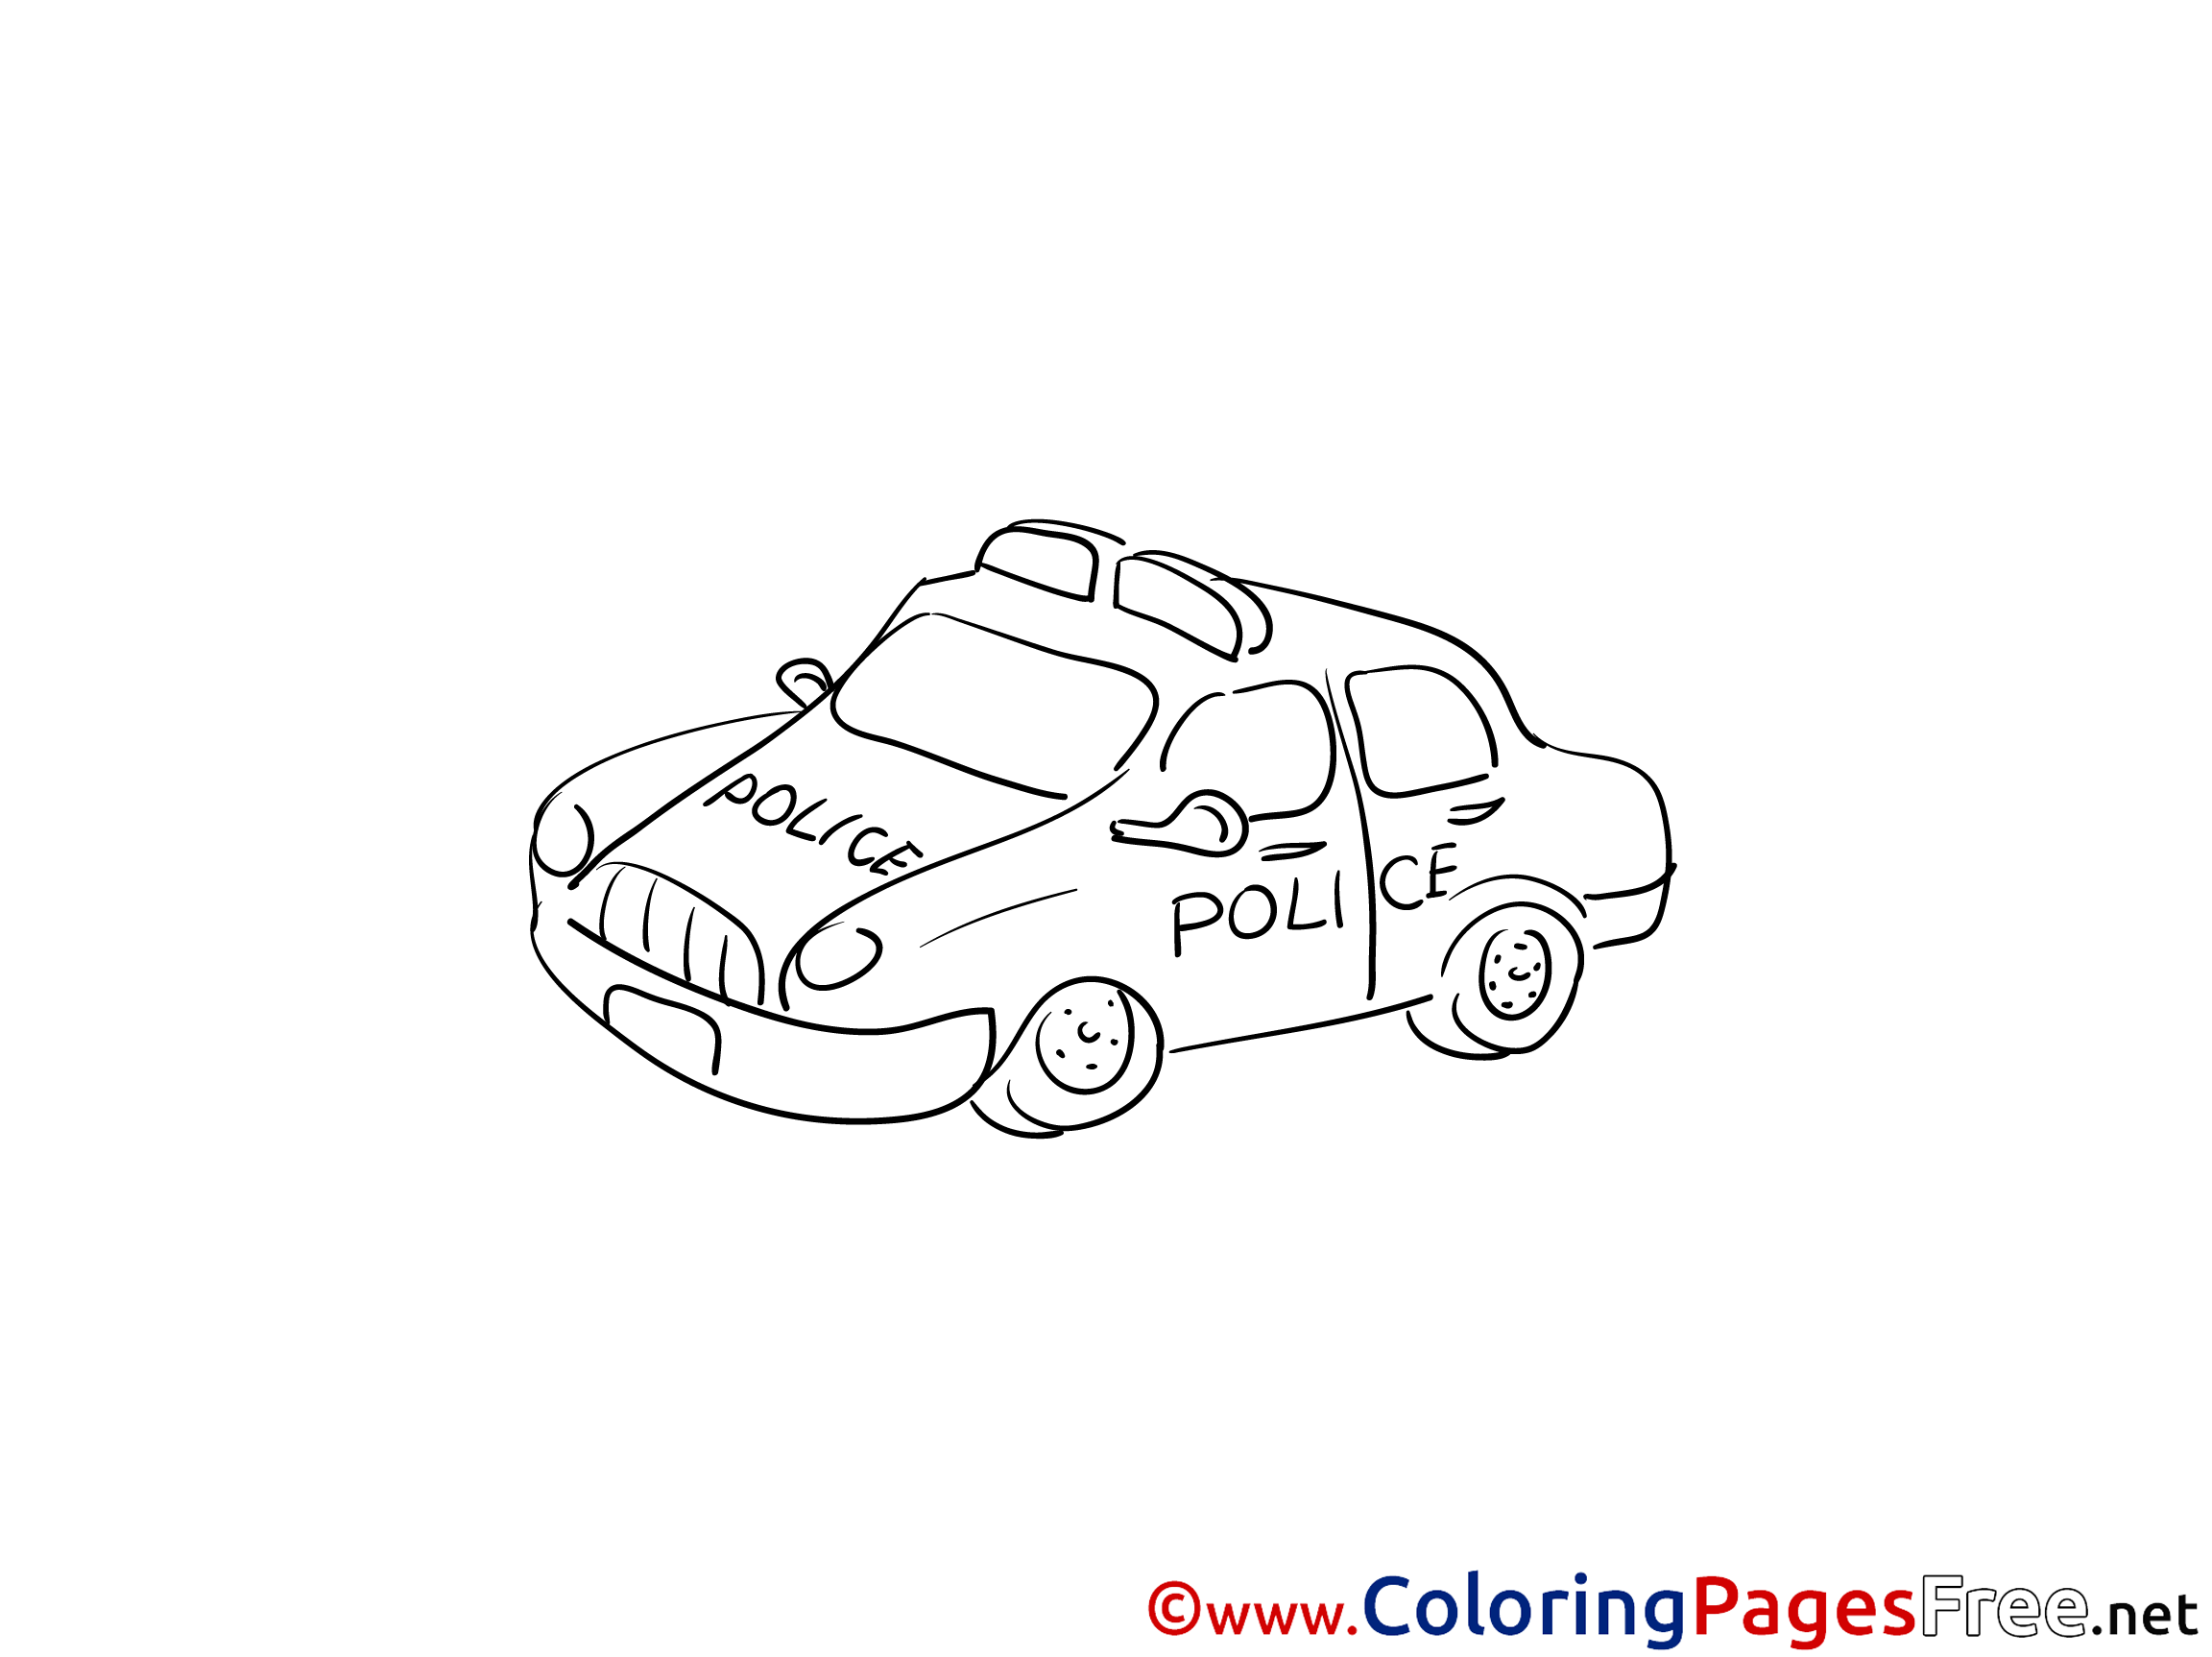 Police Car printable Coloring Pages for free